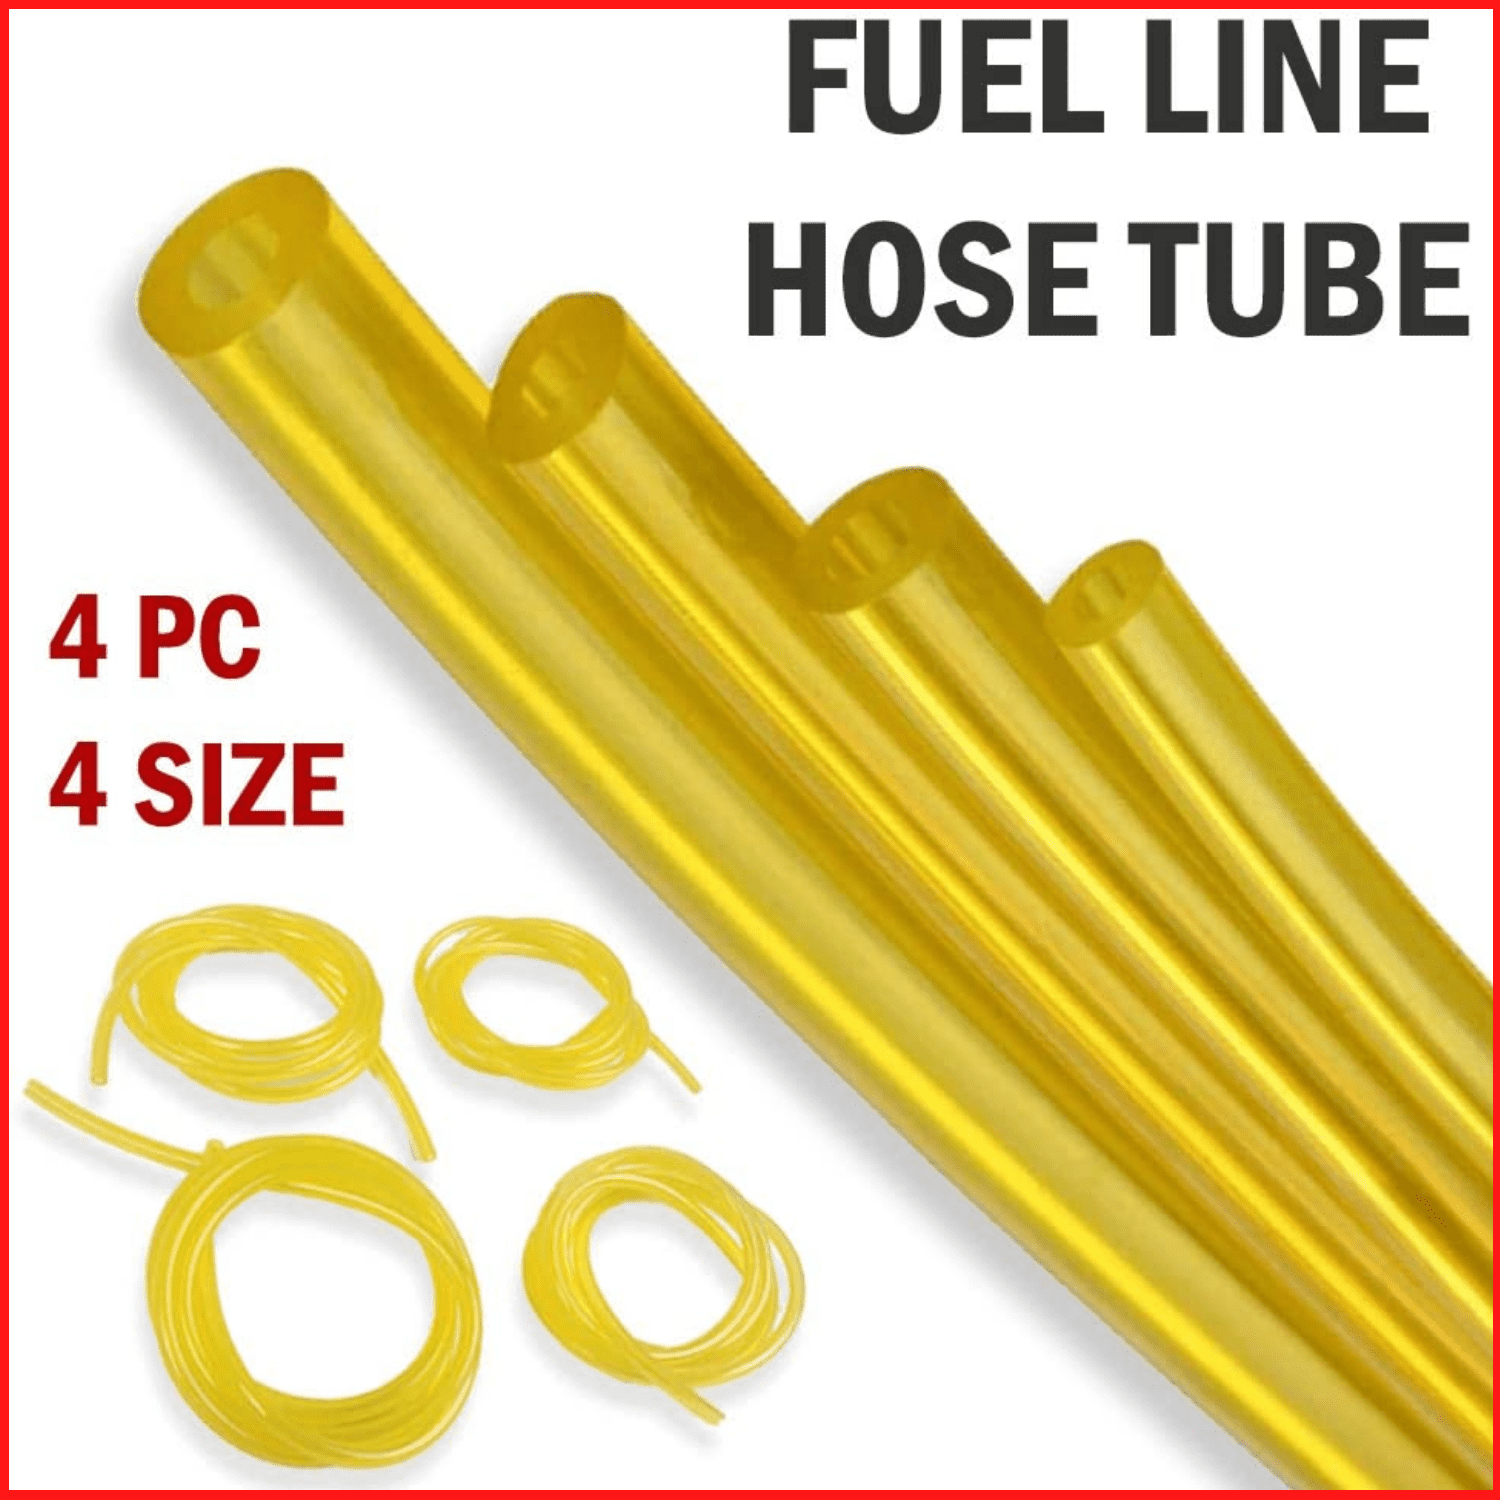 Pack of 3 Fuel Line Hose Feet Petrol Tubing Chainsaw Common Fuel Pipe Line 